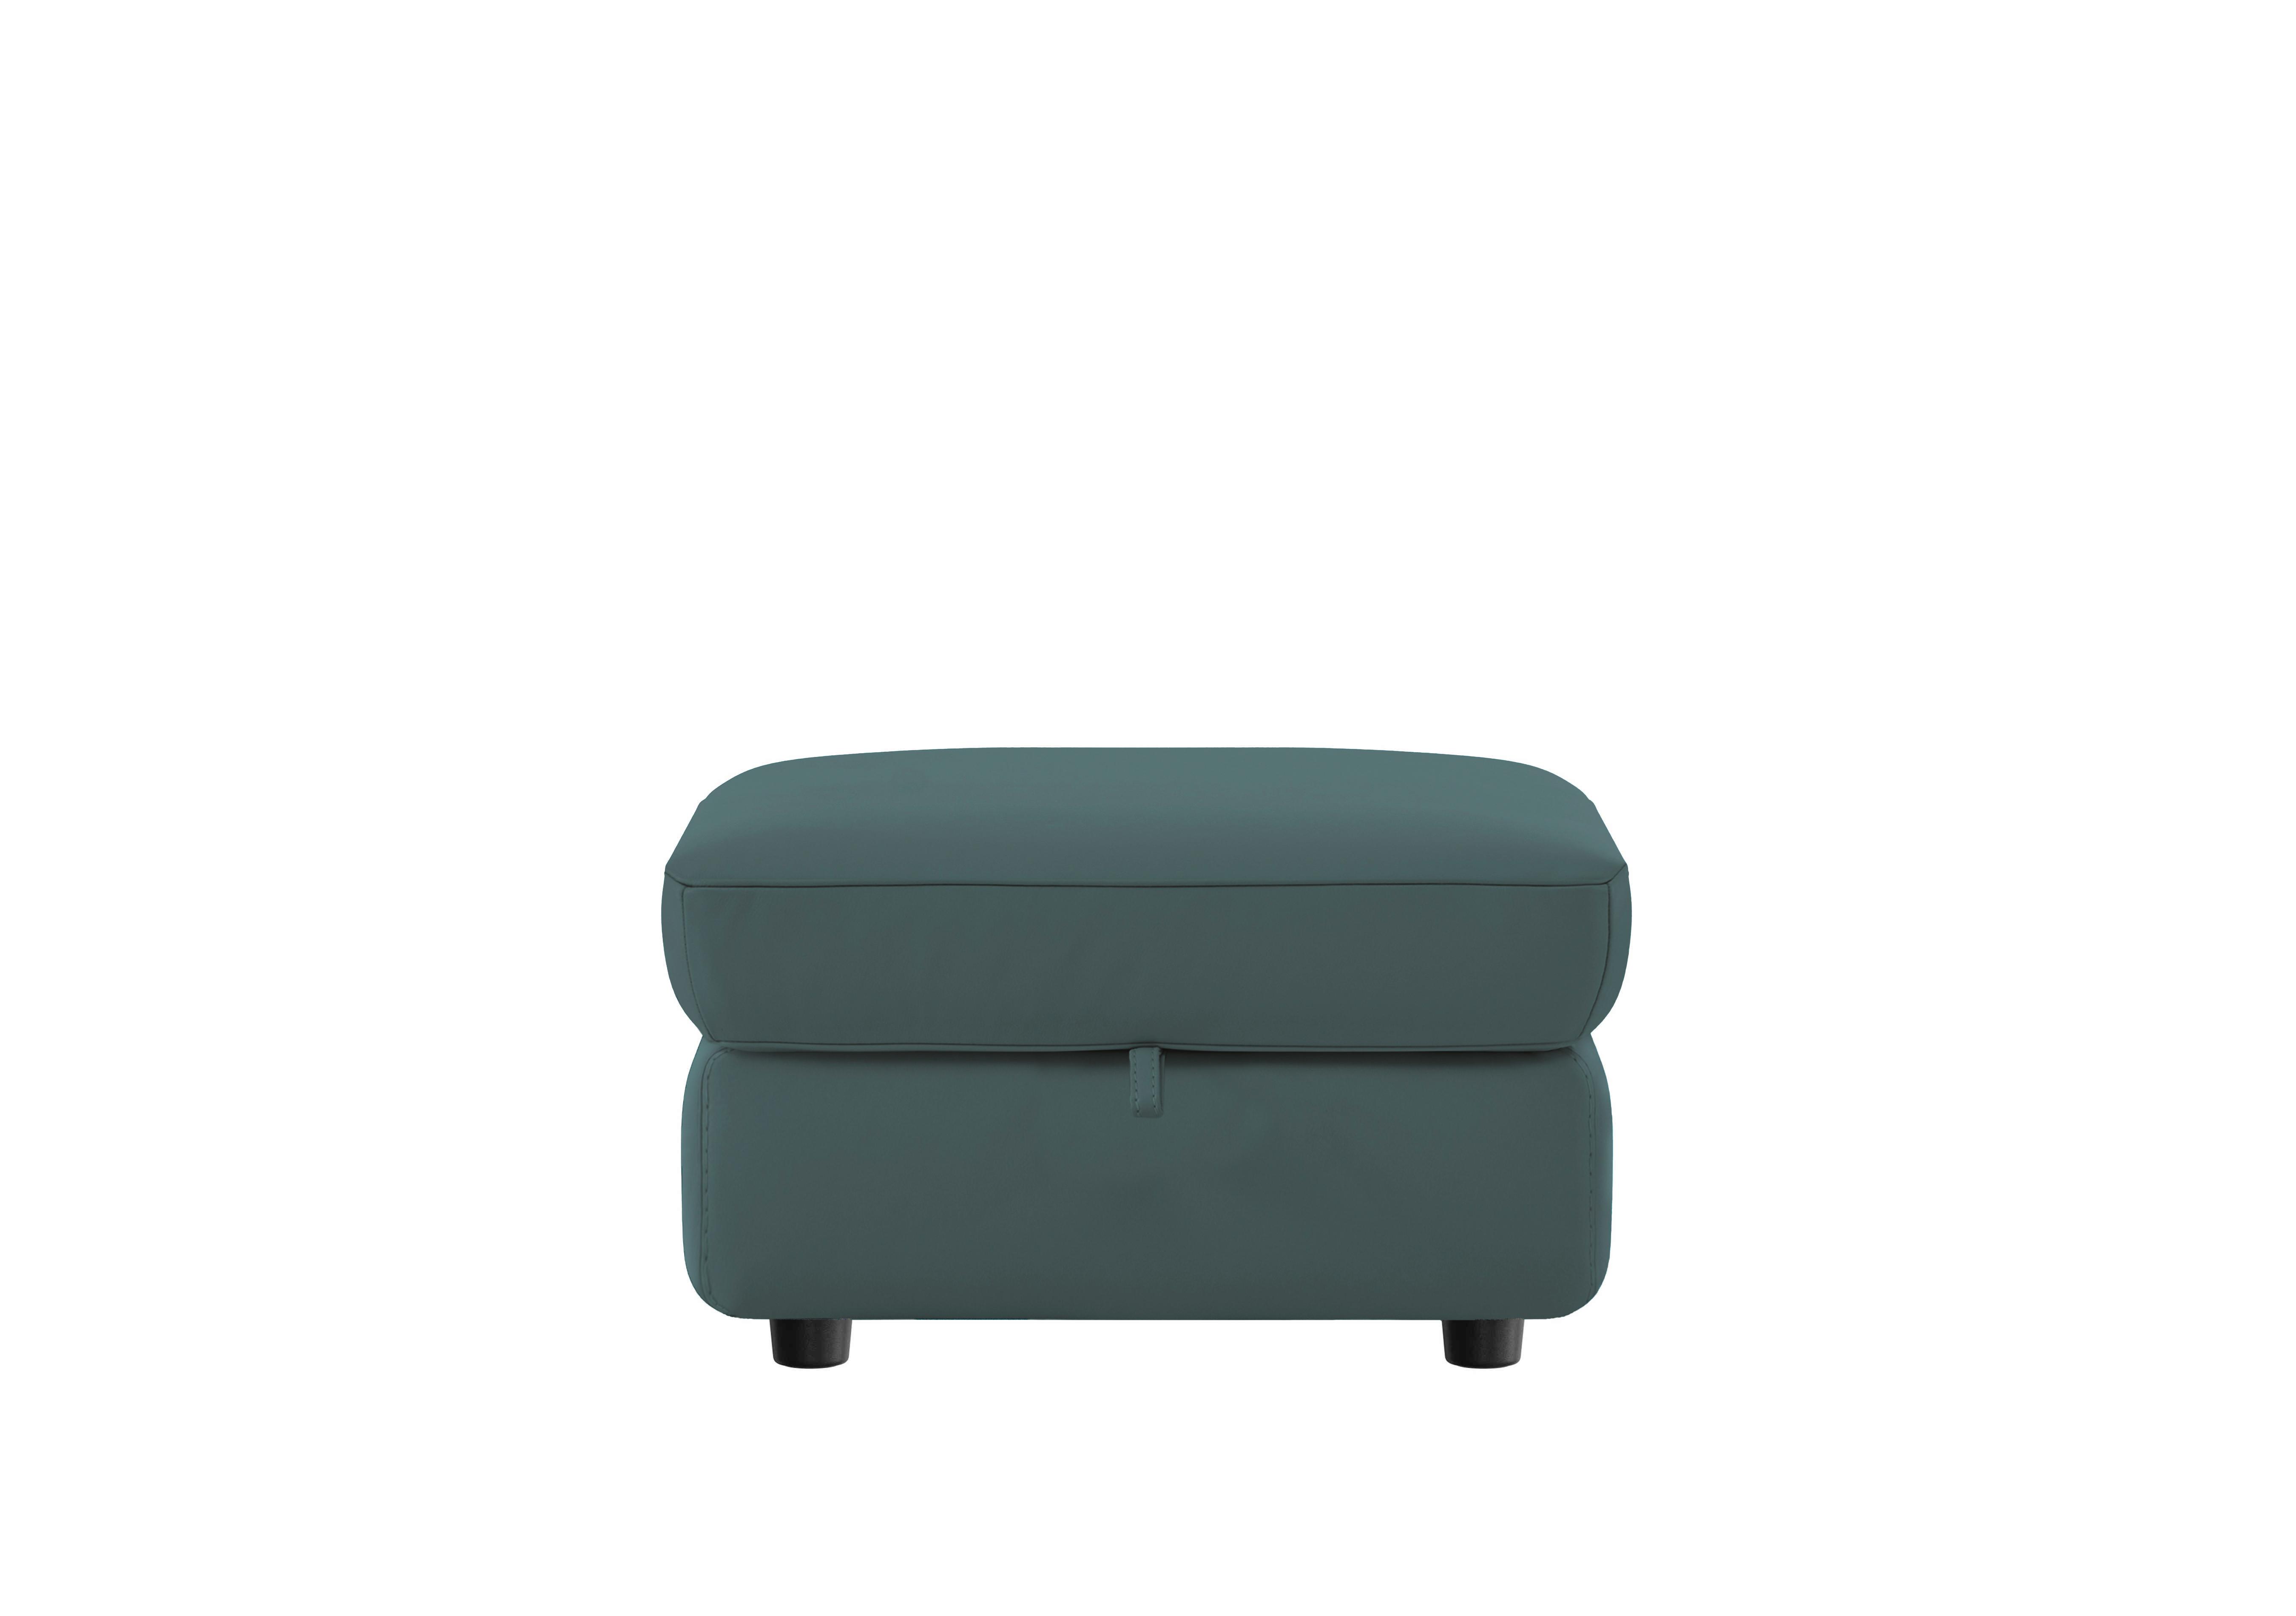 Compact Collection Piccolo Leather Storage Footstool in Bv-301e Lake Green on Furniture Village